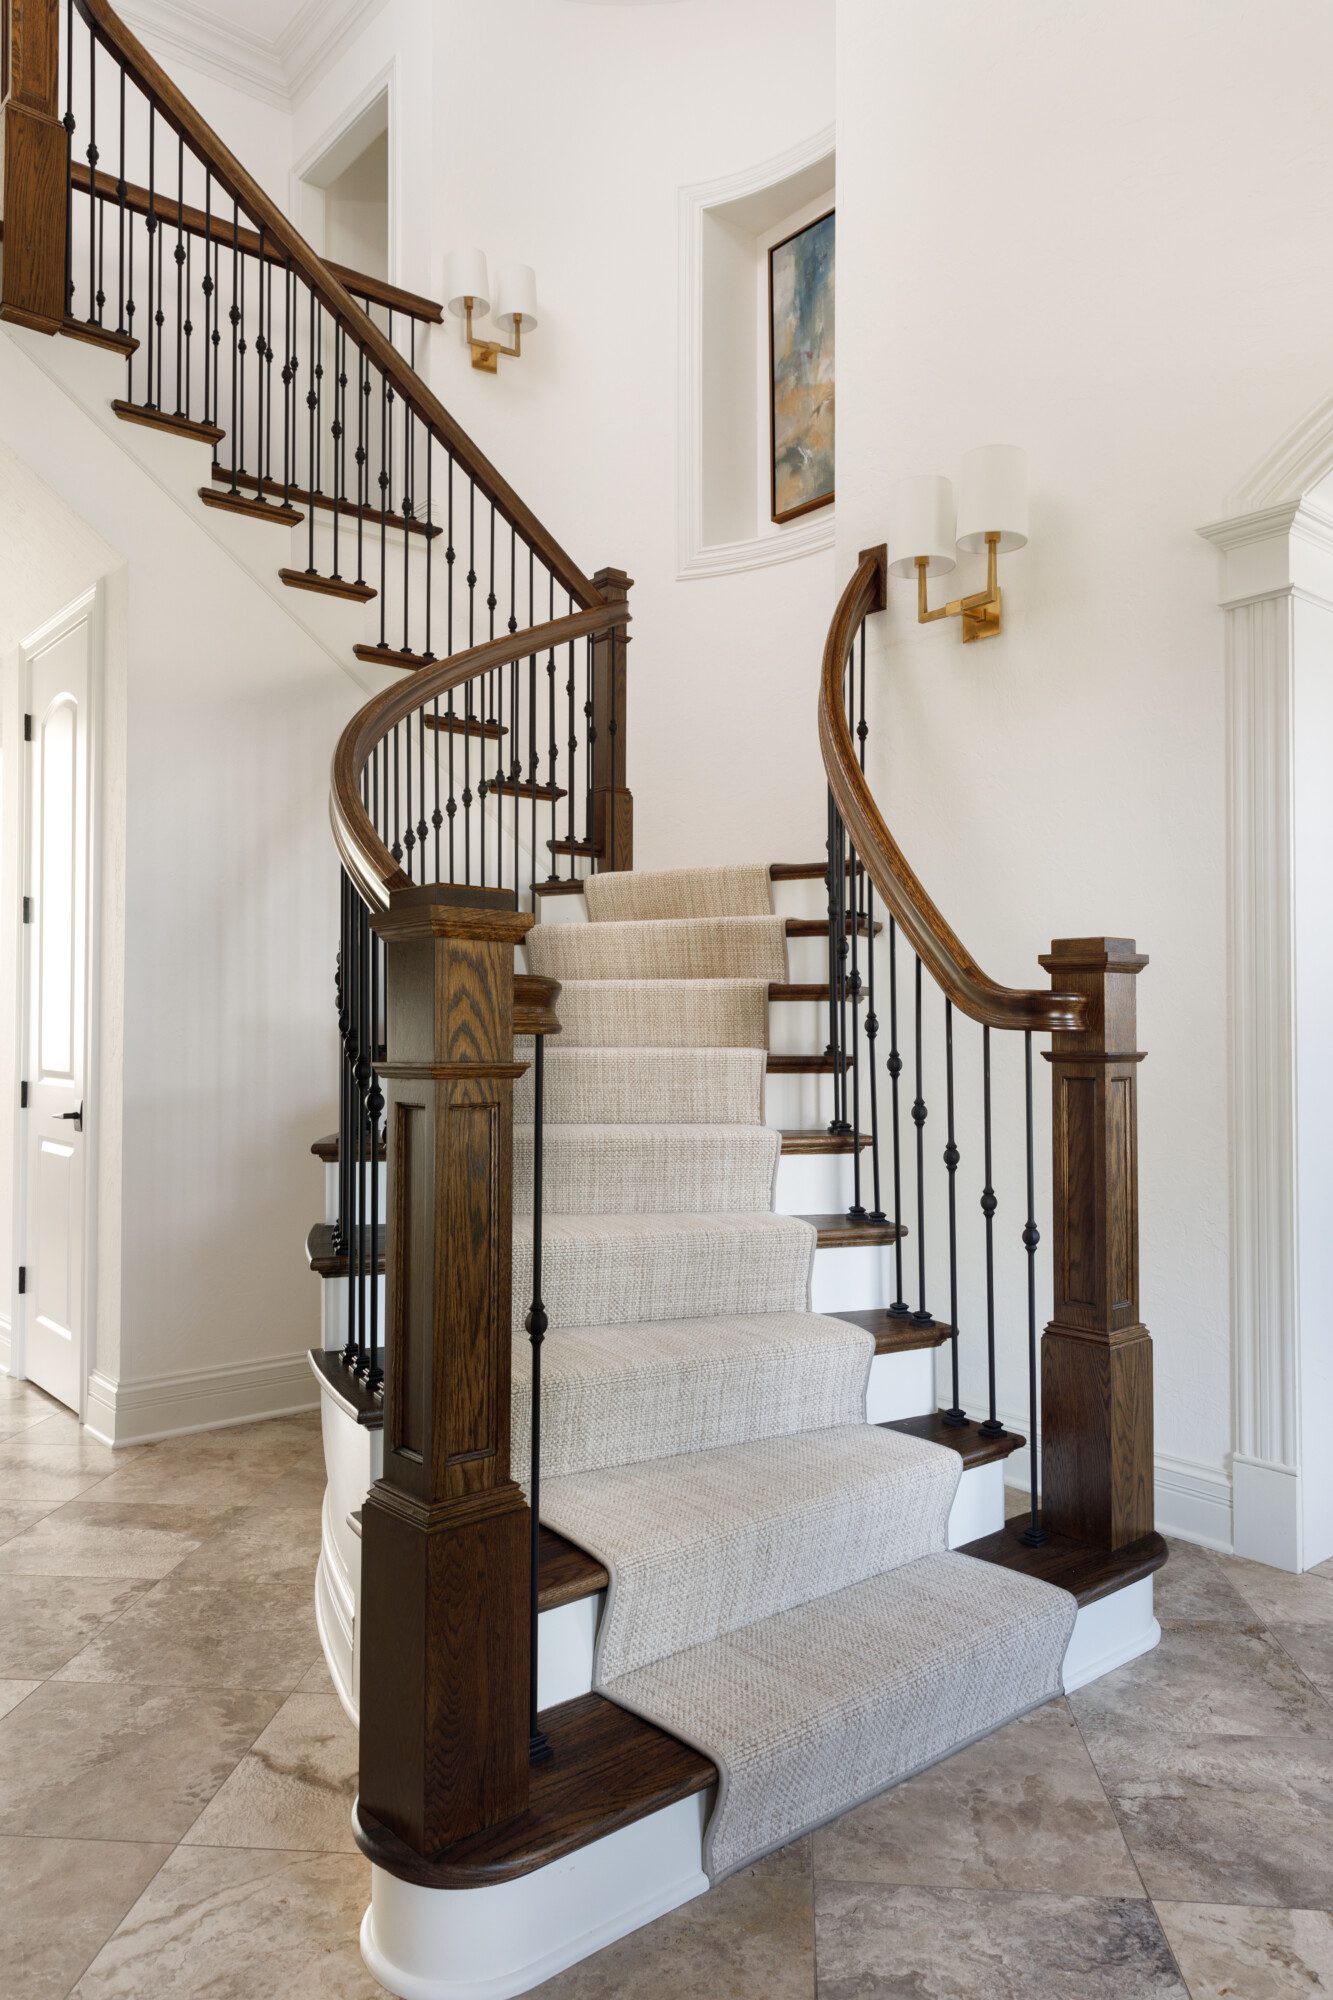 Open staircase with dark wood banisters, light carpet and walls